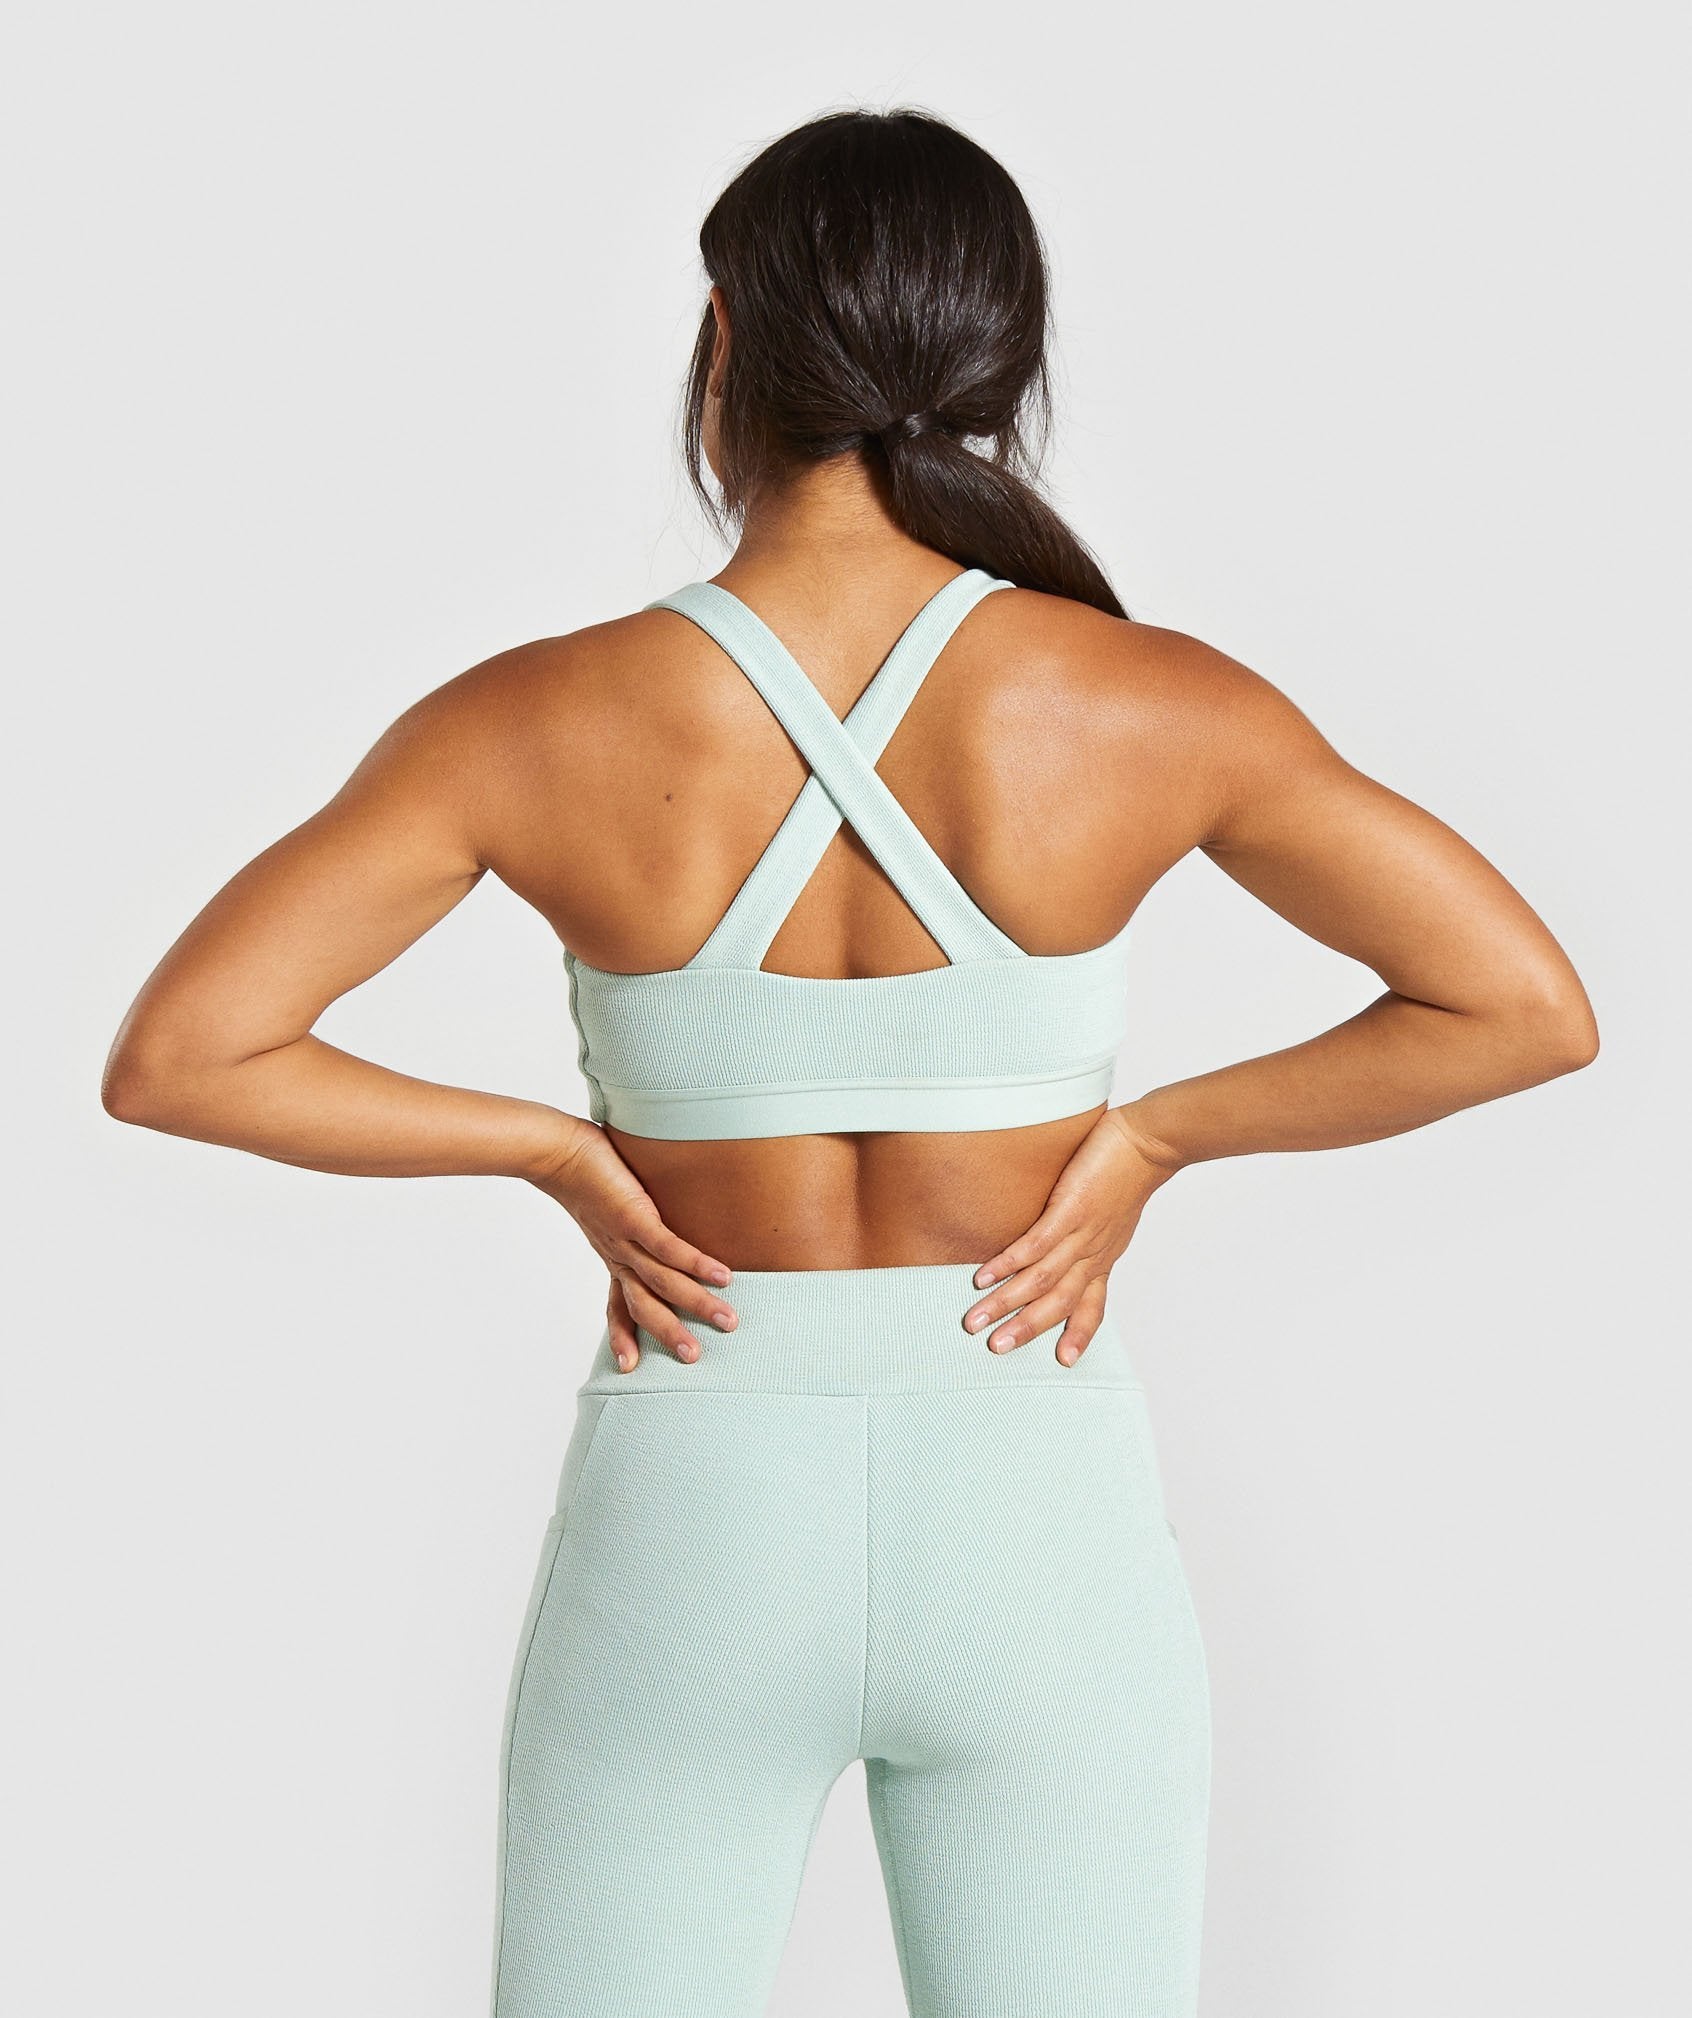 Poise Sports Bra in Light Green - view 2